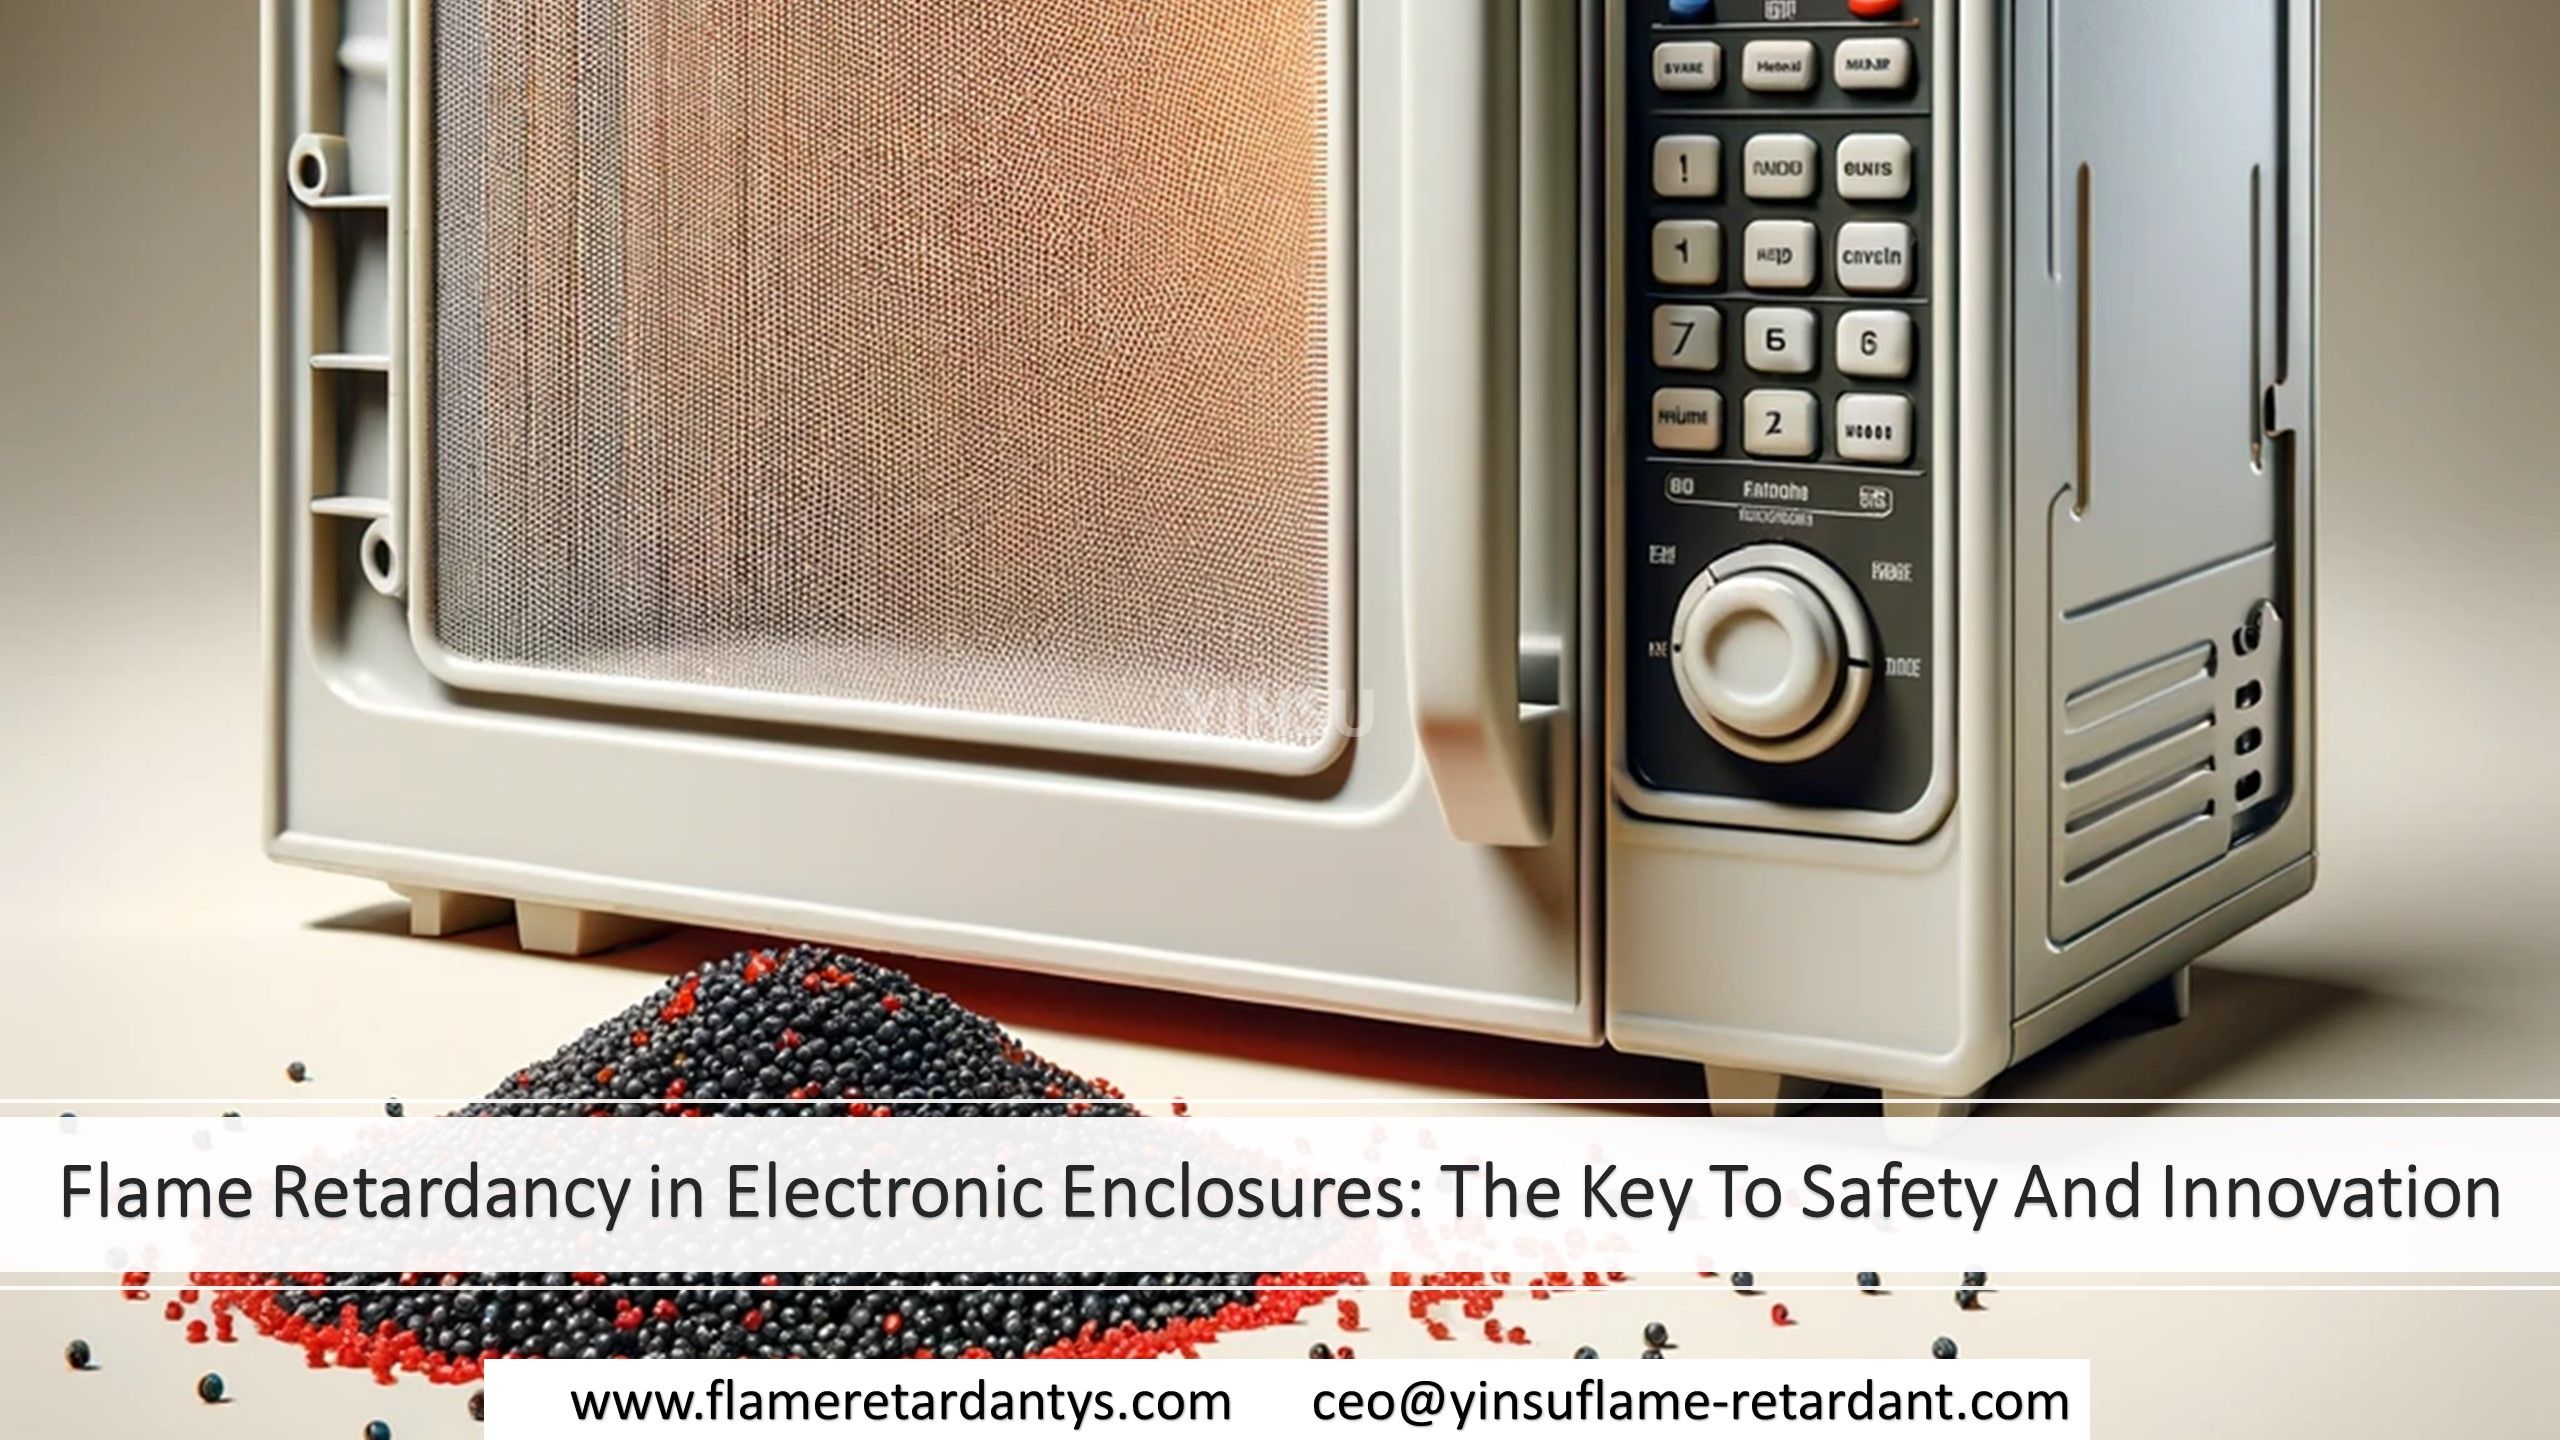 7.1 Flame Retardancy in Electronic Enclosures The Key To Safety And Innovation